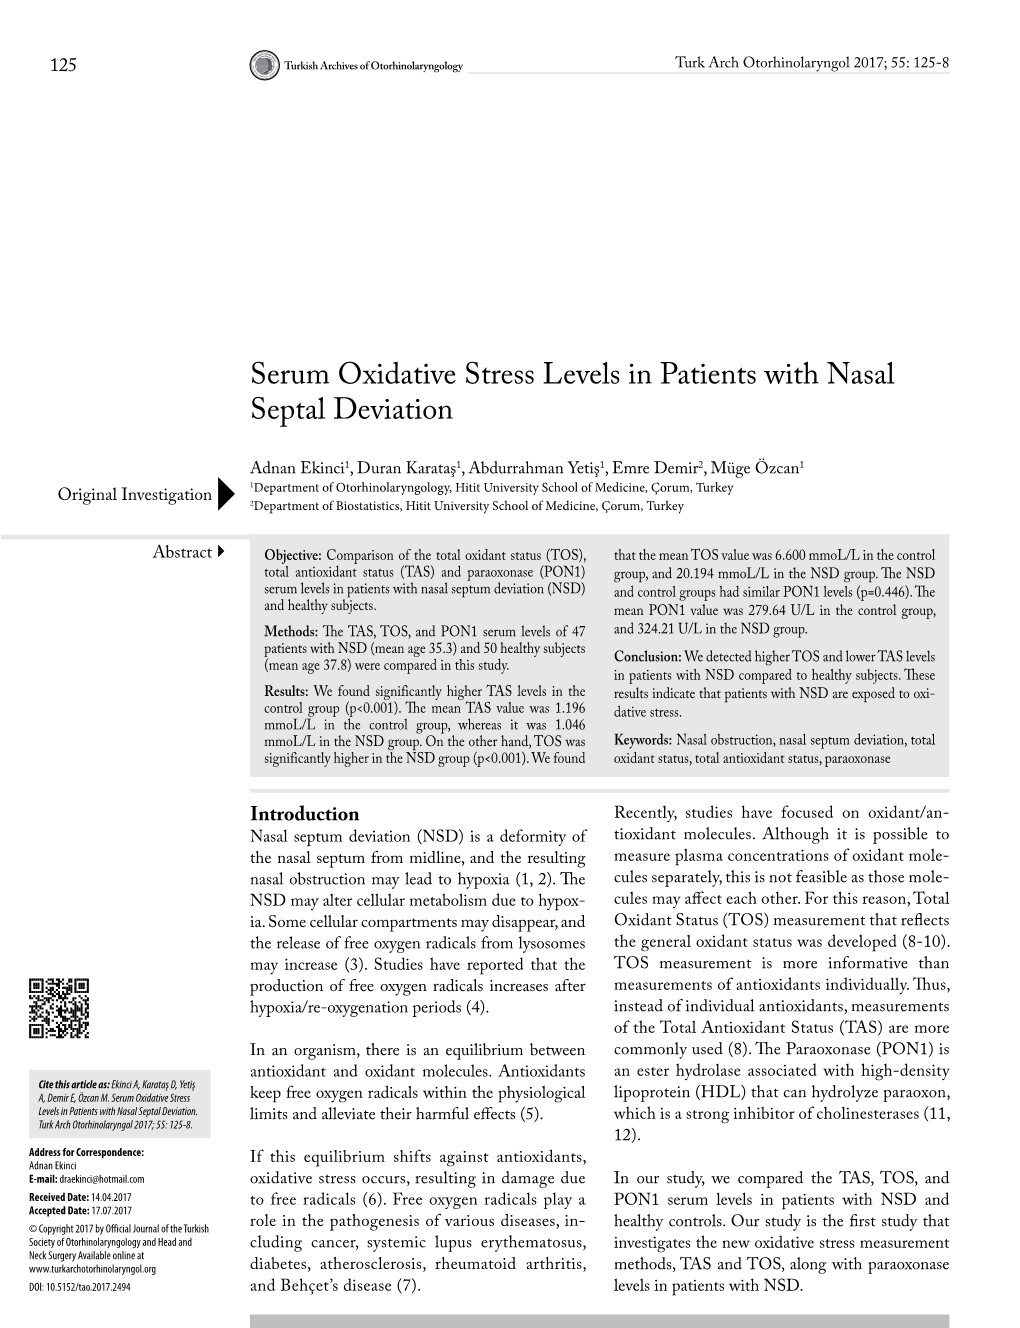 Serum Oxidative Stress Levels in Patients with Nasal Septal Deviation